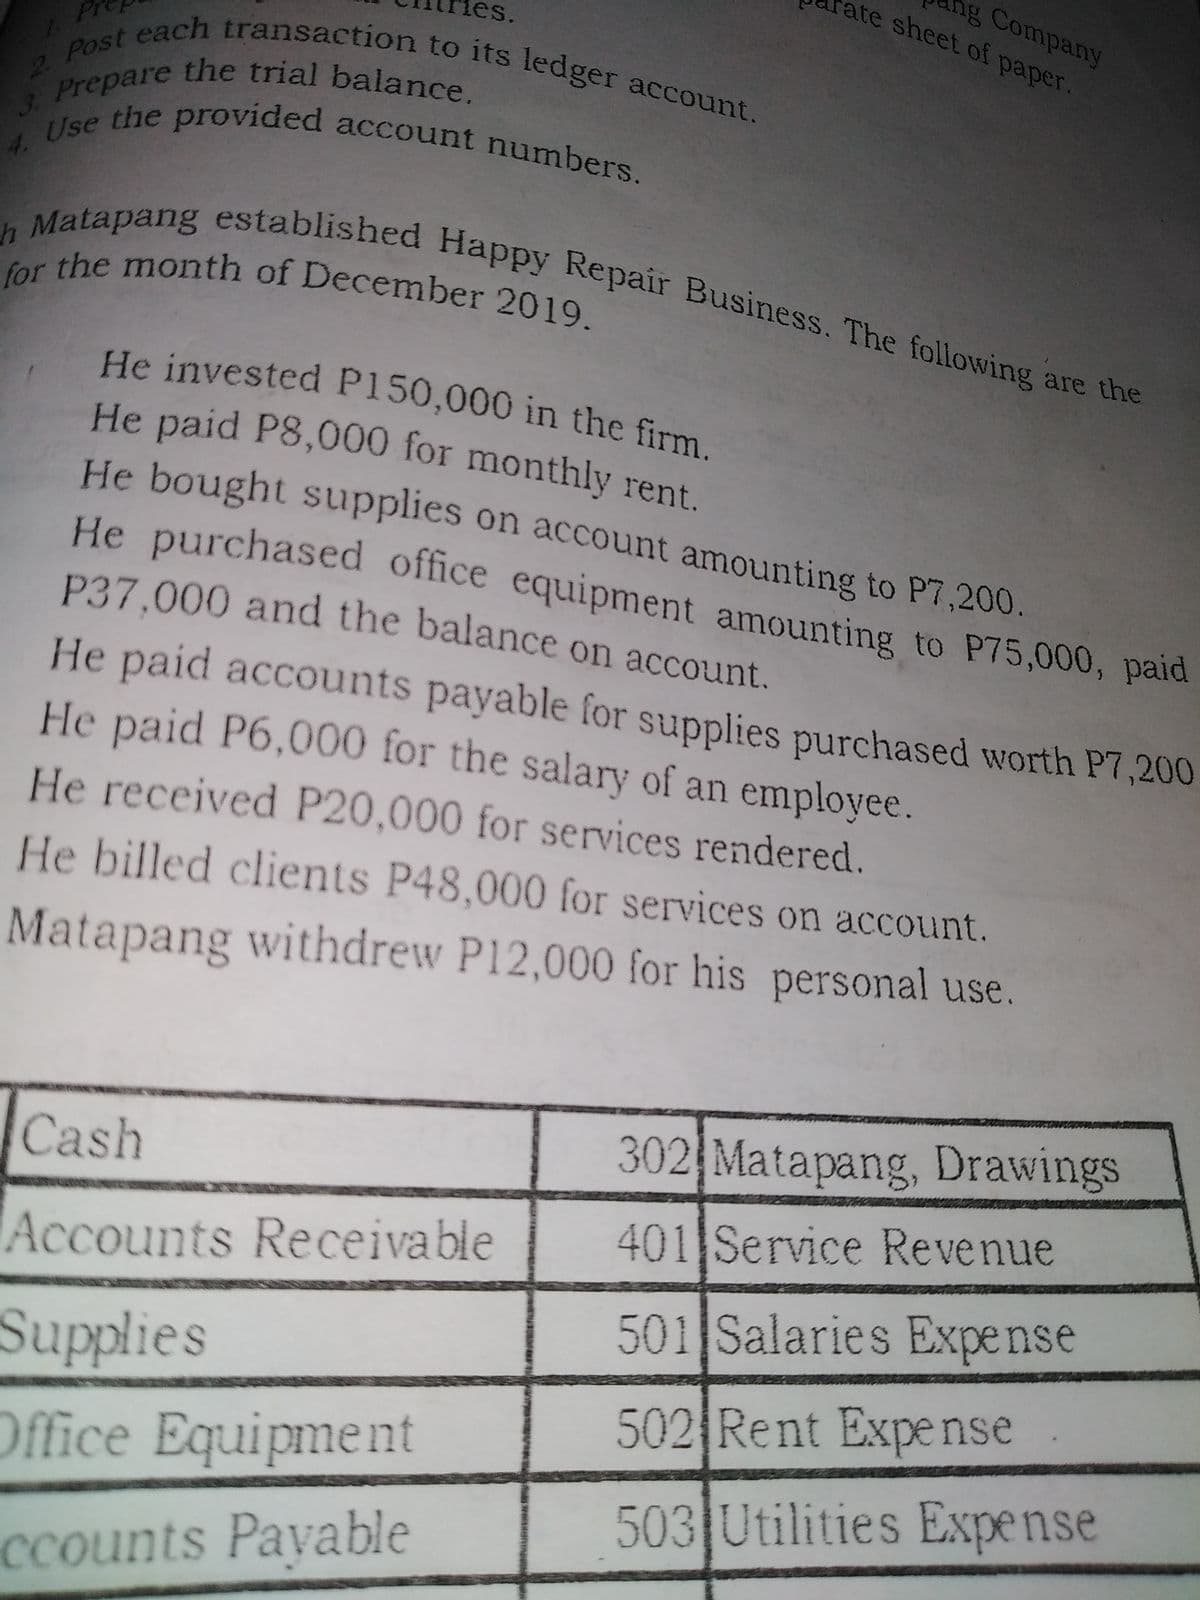 g Company
ate sheet of paper.
3. Prepare the trial balance.
Matapang established Happy Repair Business. The following are the
es.
Post each transaction to its ledger account.
He bought supplies on account amounting to P7,200.
He purchased office equipment amounting to P75,000, paid
He invested P150,000 in the firm.
4. Use the provided account numbers.
for the month of December 2019.
He paid P8,000 for monthly rent.
the trial balance.
Prepare
the provided account numbers
2.
3.
He invested P150,000 in the firm
He bought supplies on account amounting to P7,200.
P37.000 and the balance on account.
He paid accounts payable for supplies purchased worth P7,200
He paid P6,000 for the salary of an employee.
He received P20,000 for services rendered.
He billed clients P48,000 for services on account.
Matapang withdrew P12,000 for his personal use.
Cash
302 Matapang, Drawings
401 Service Revenue
Accounts Receivable
501 Salaries Expe nse
Supplies
502 Rent Expense
Office Equipment
503 Utilities Expense
ccounts Payable
